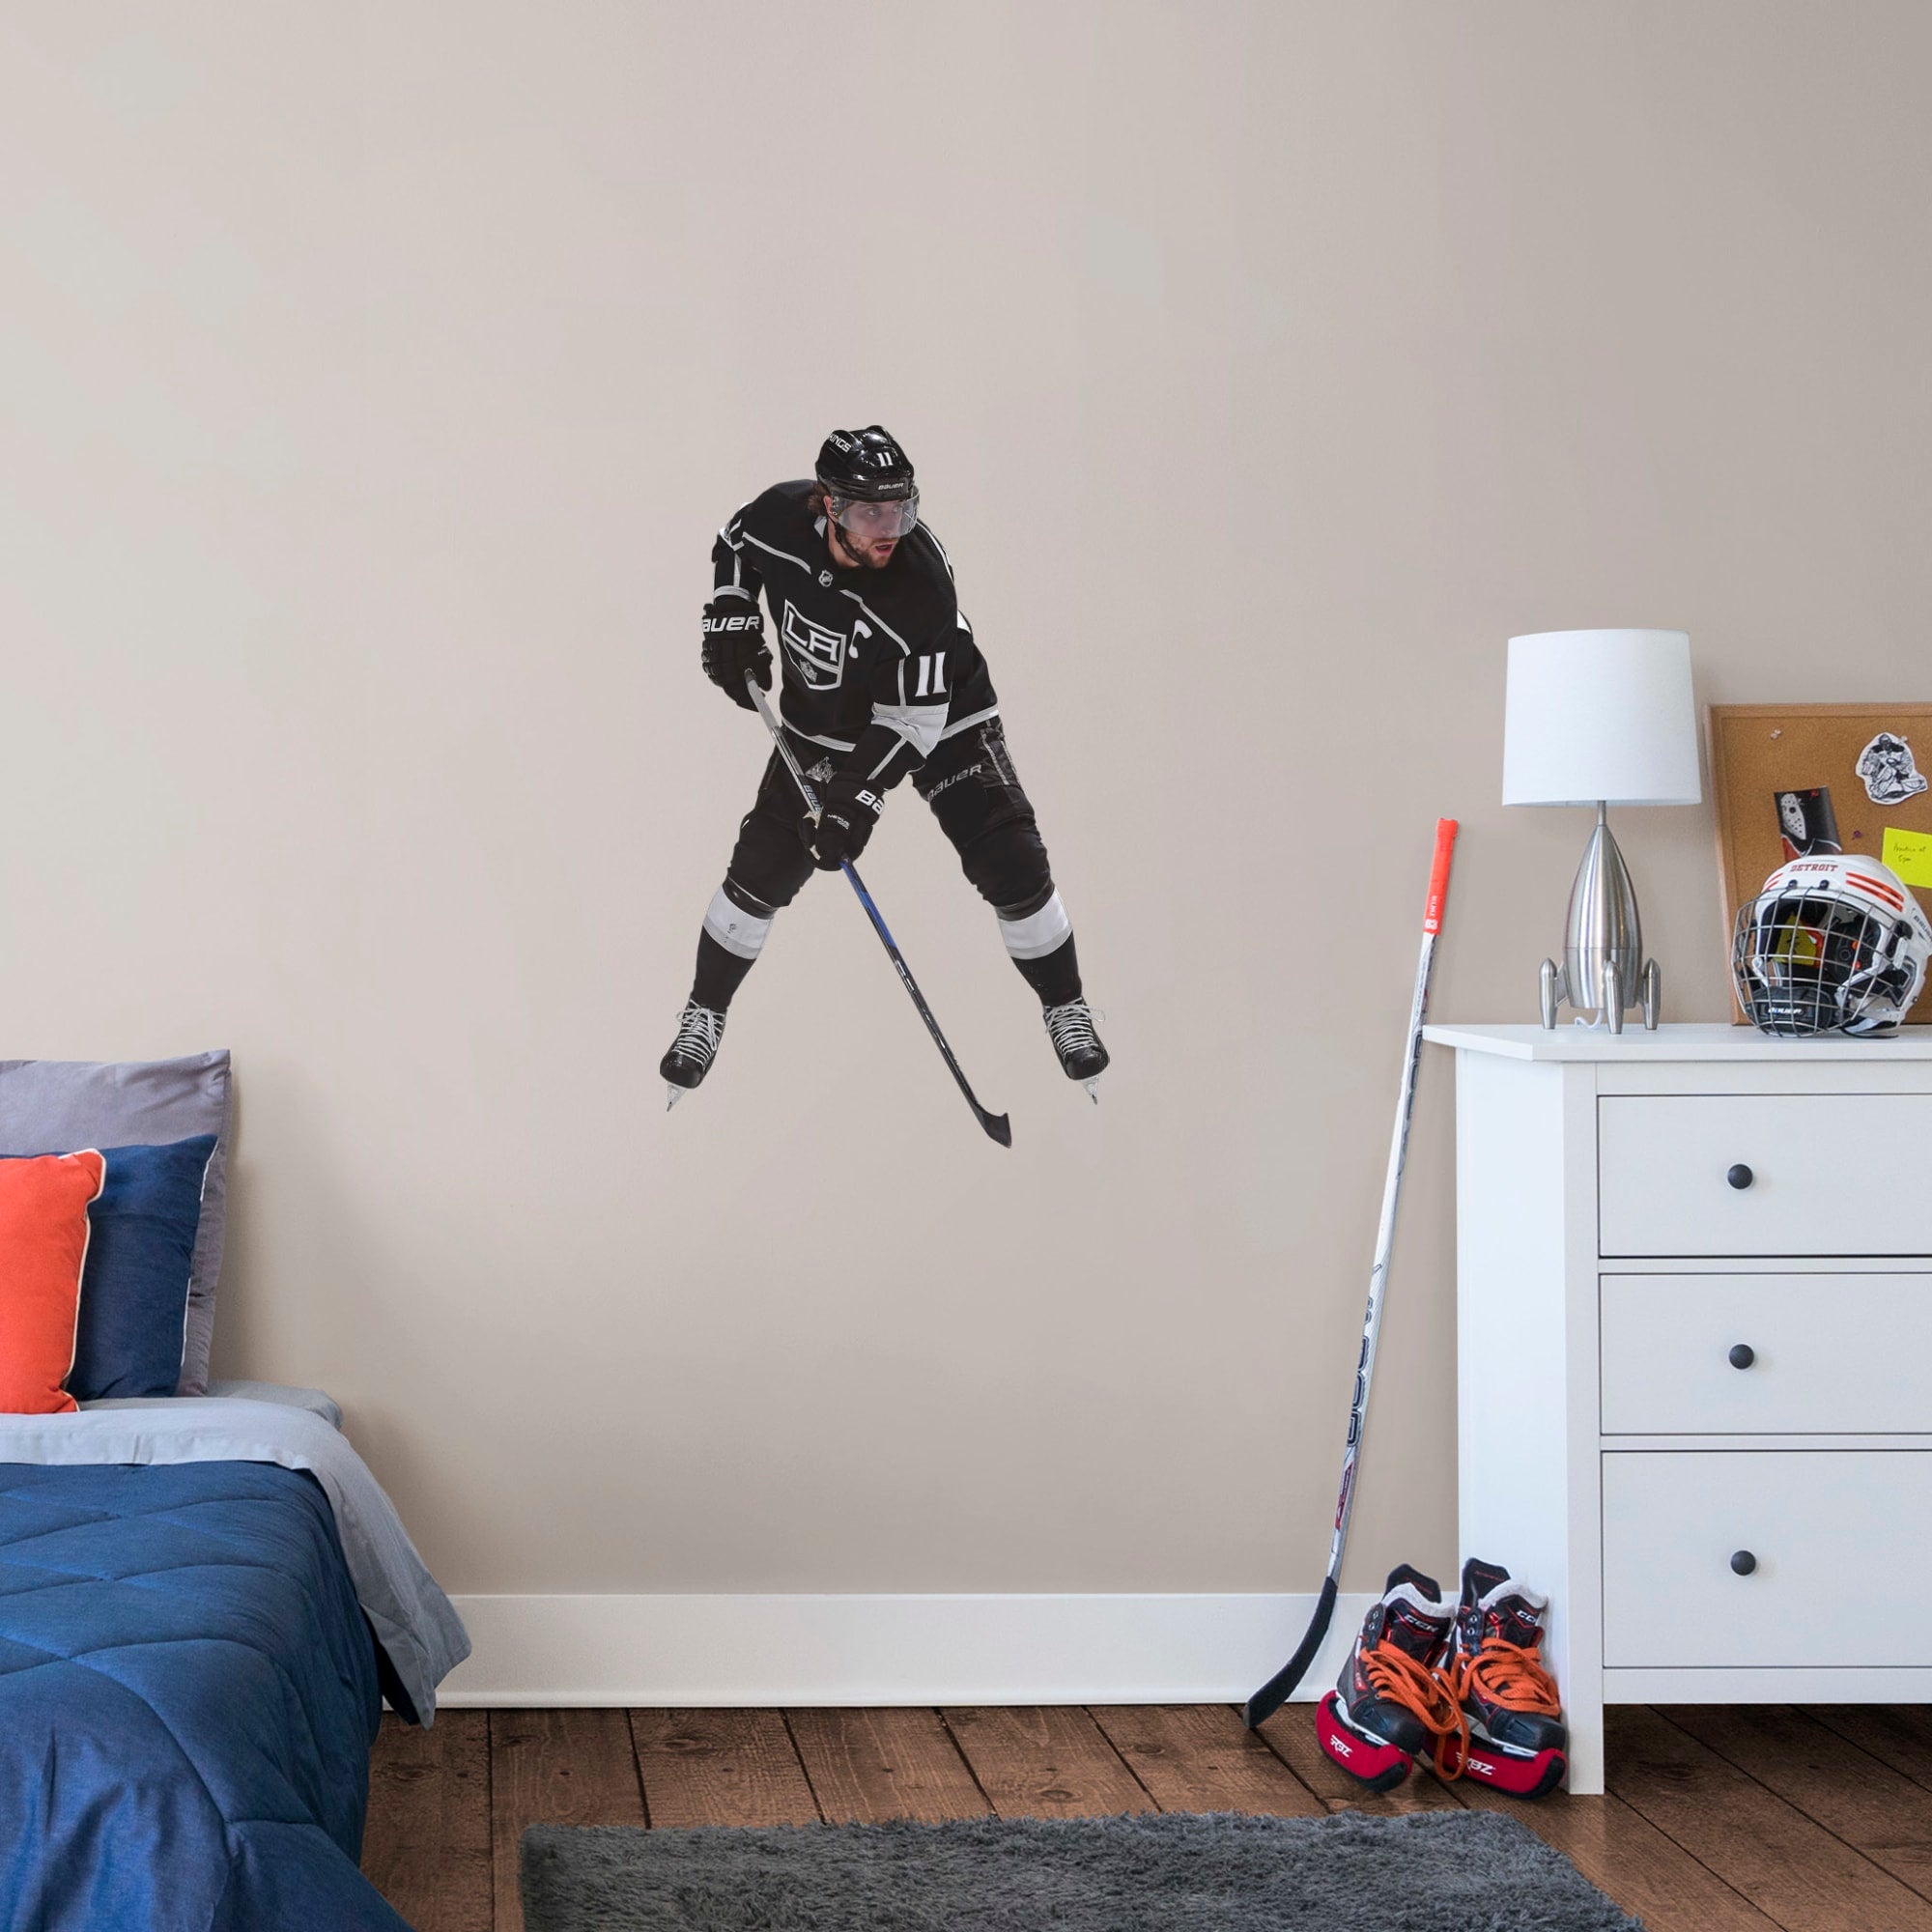 Anze Kopitar for Los Angeles Kings - Officially Licensed NHL Removable Wall Decal XL by Fathead | Vinyl